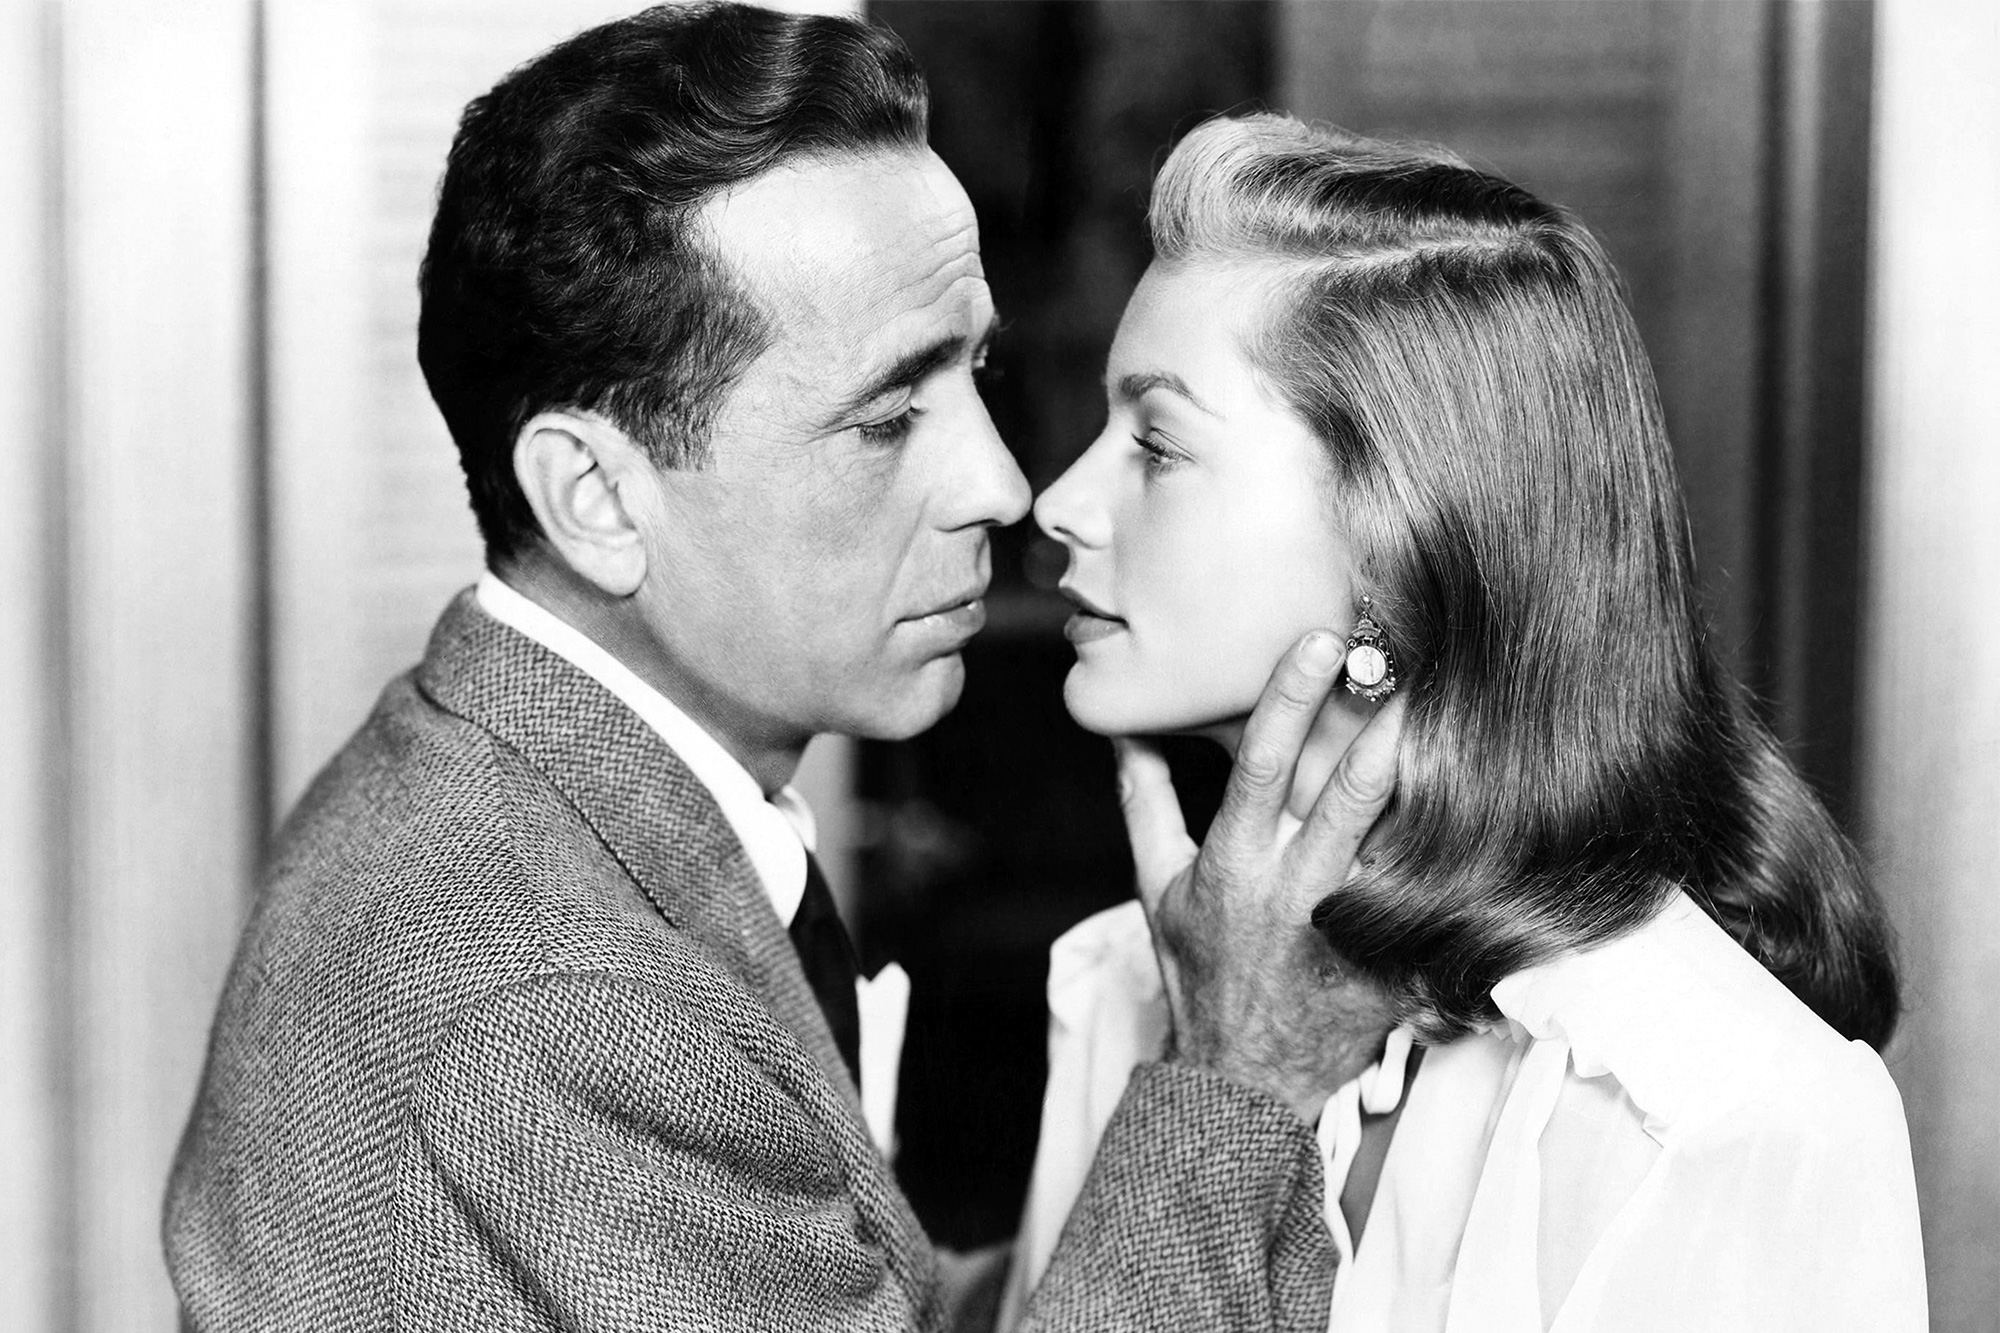 Lauren Bacall and Humphrey Bogart in a scene from the movie"Dark Passage"